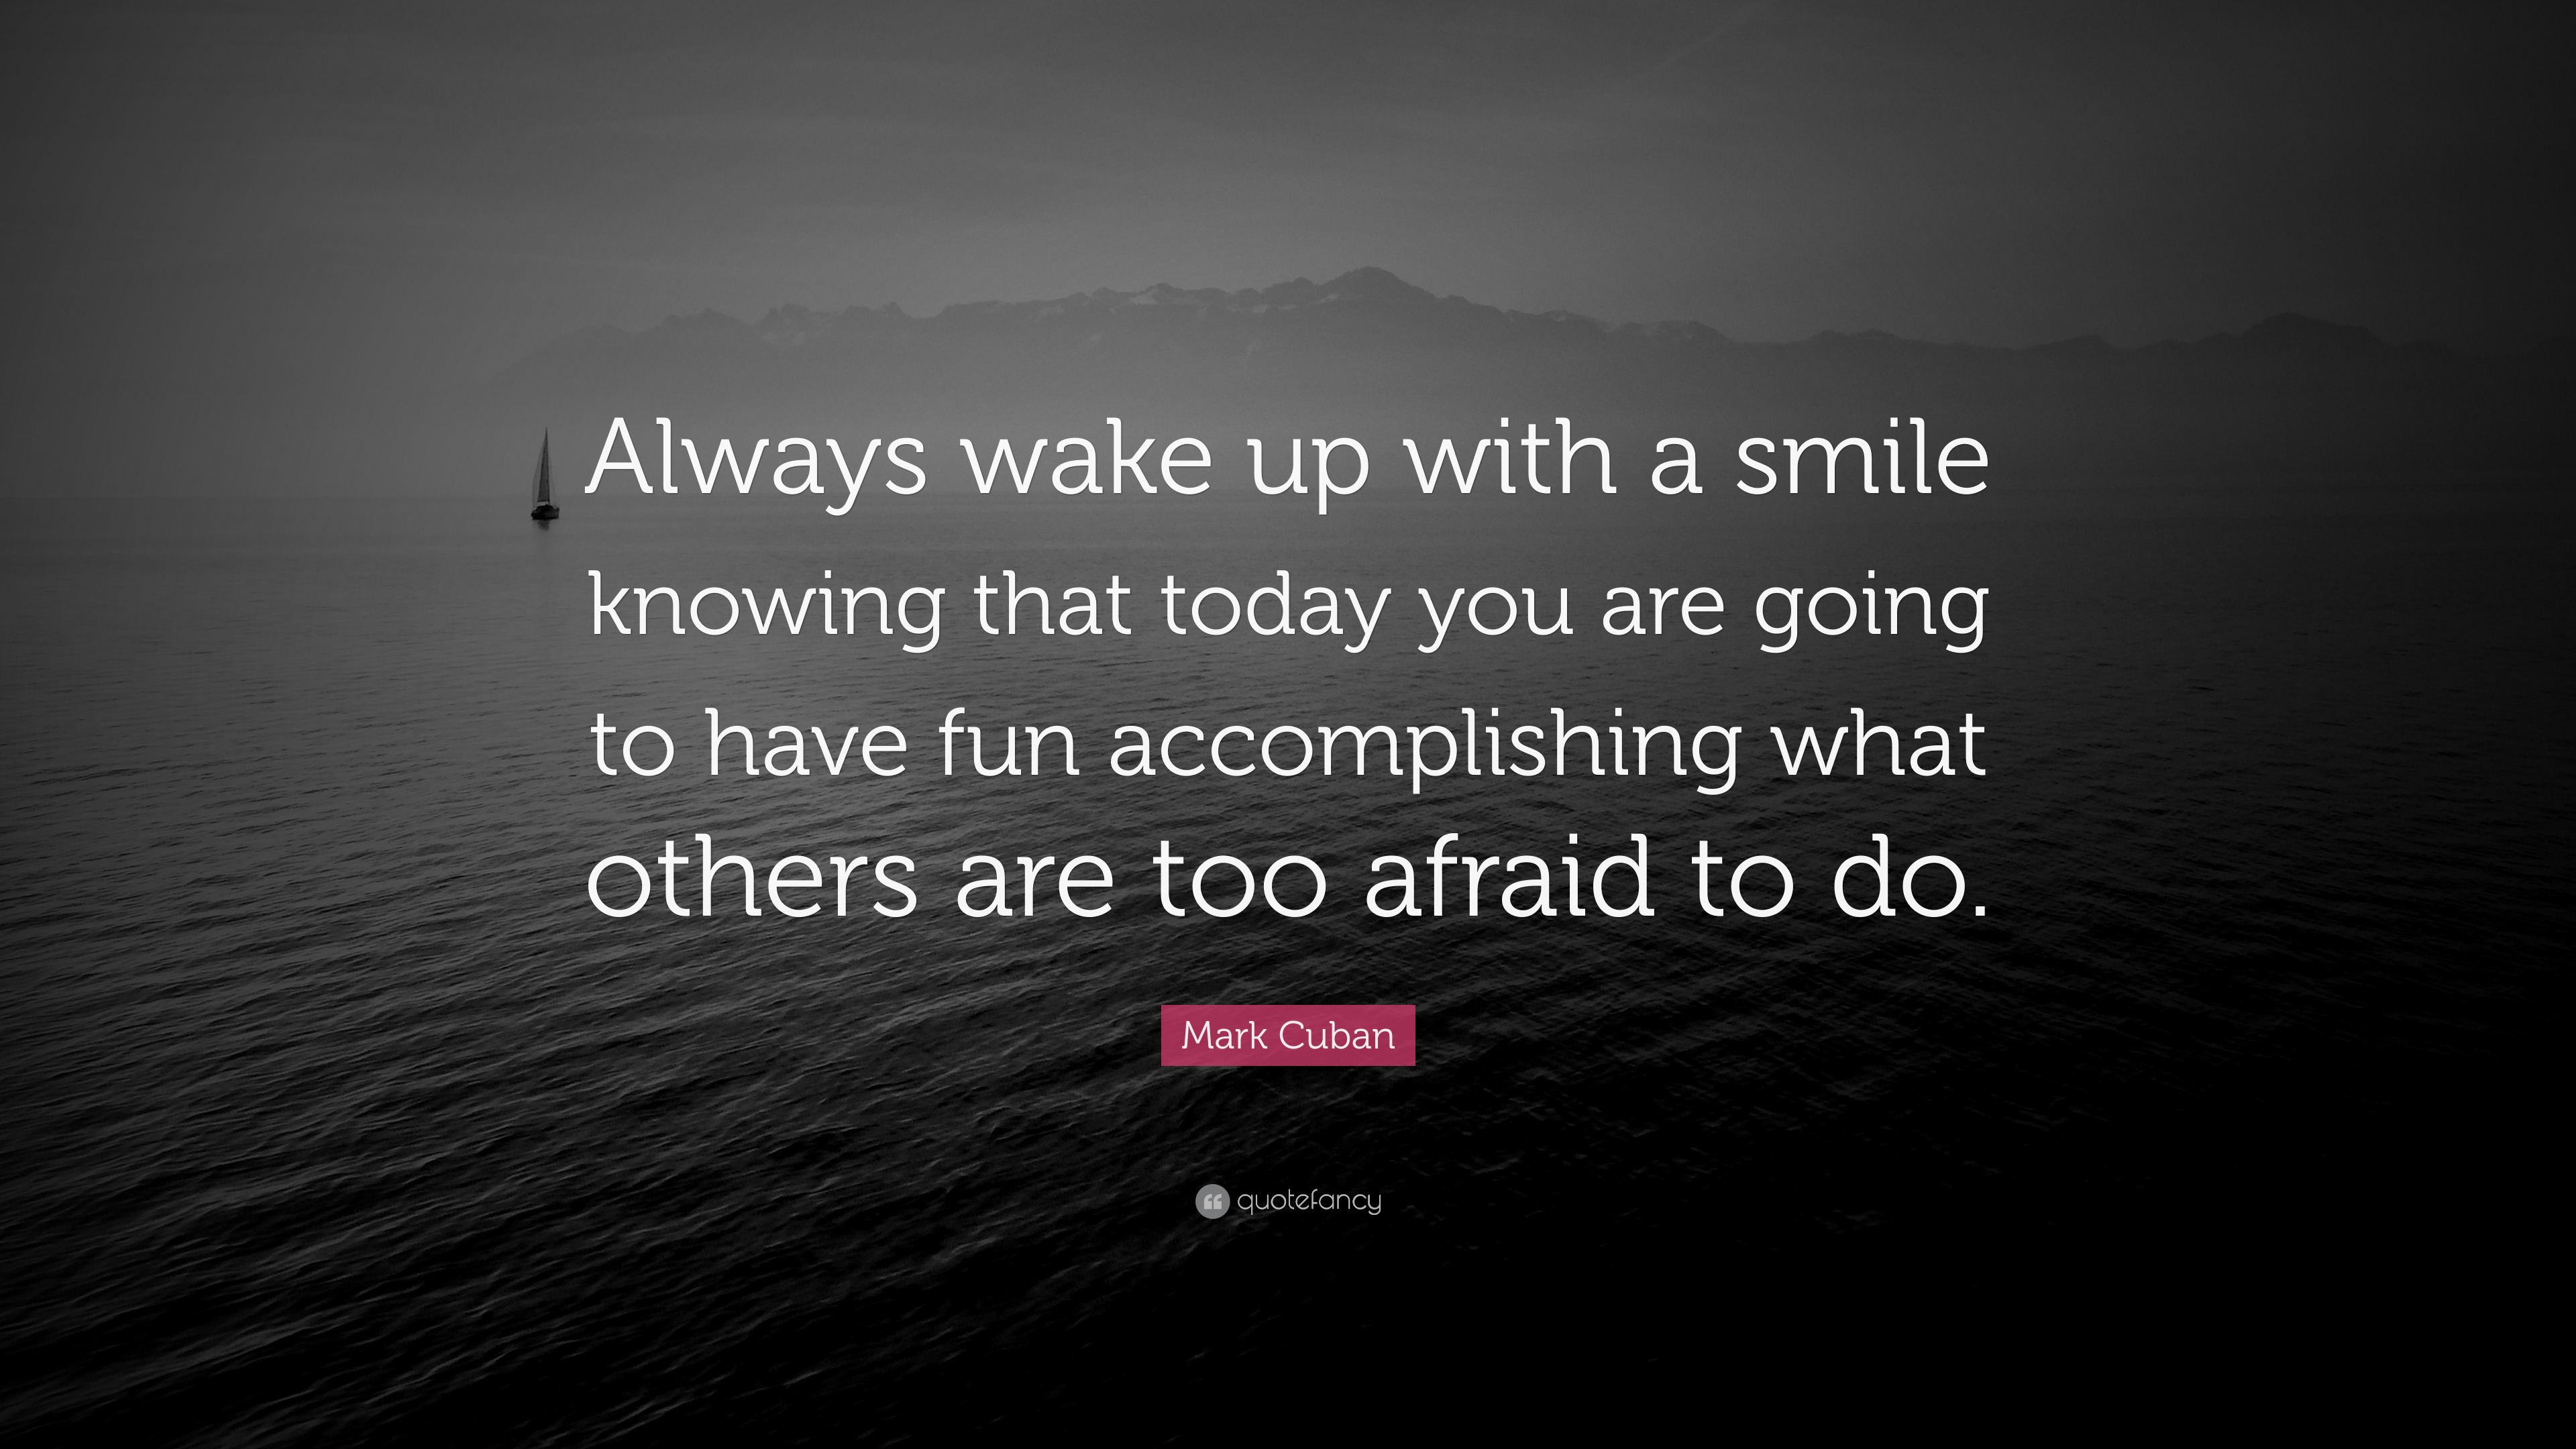 Mark Cuban Quote: “Always wake up with a smile knowing that today you ...